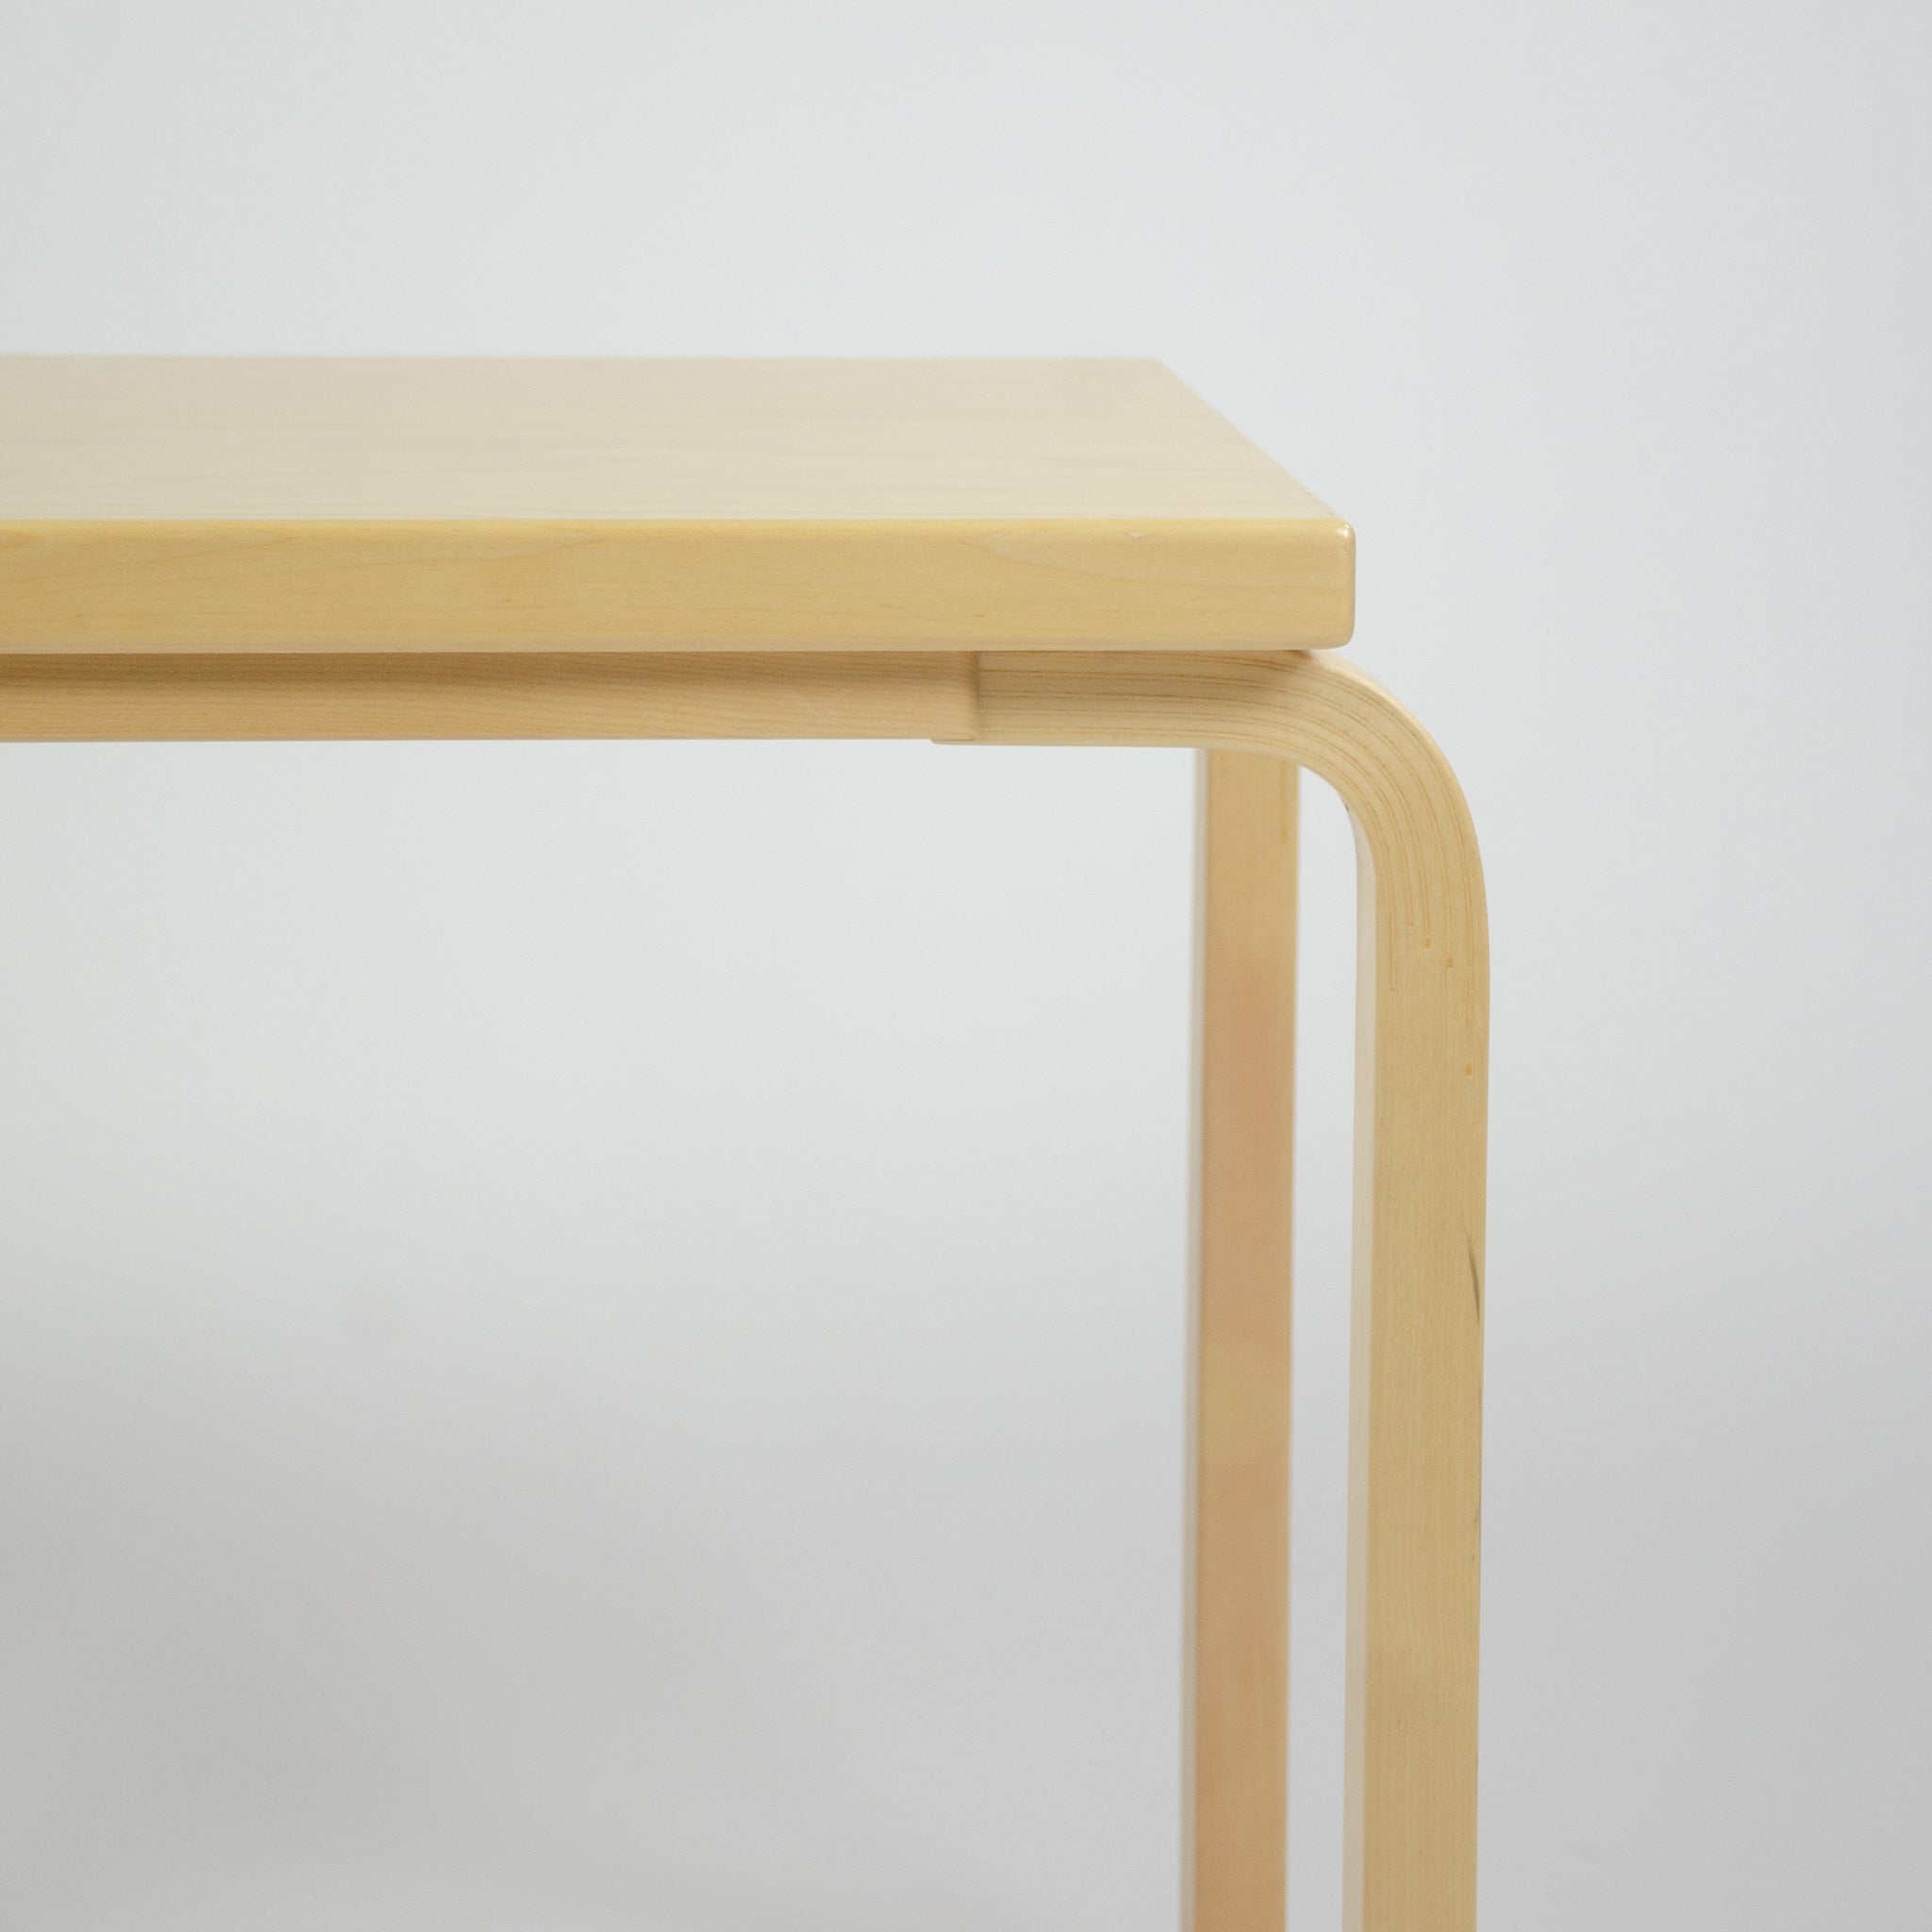 SOLD Alvar Aalto Nesting Table 88 by Artek Birch Made In Finland (1x available)